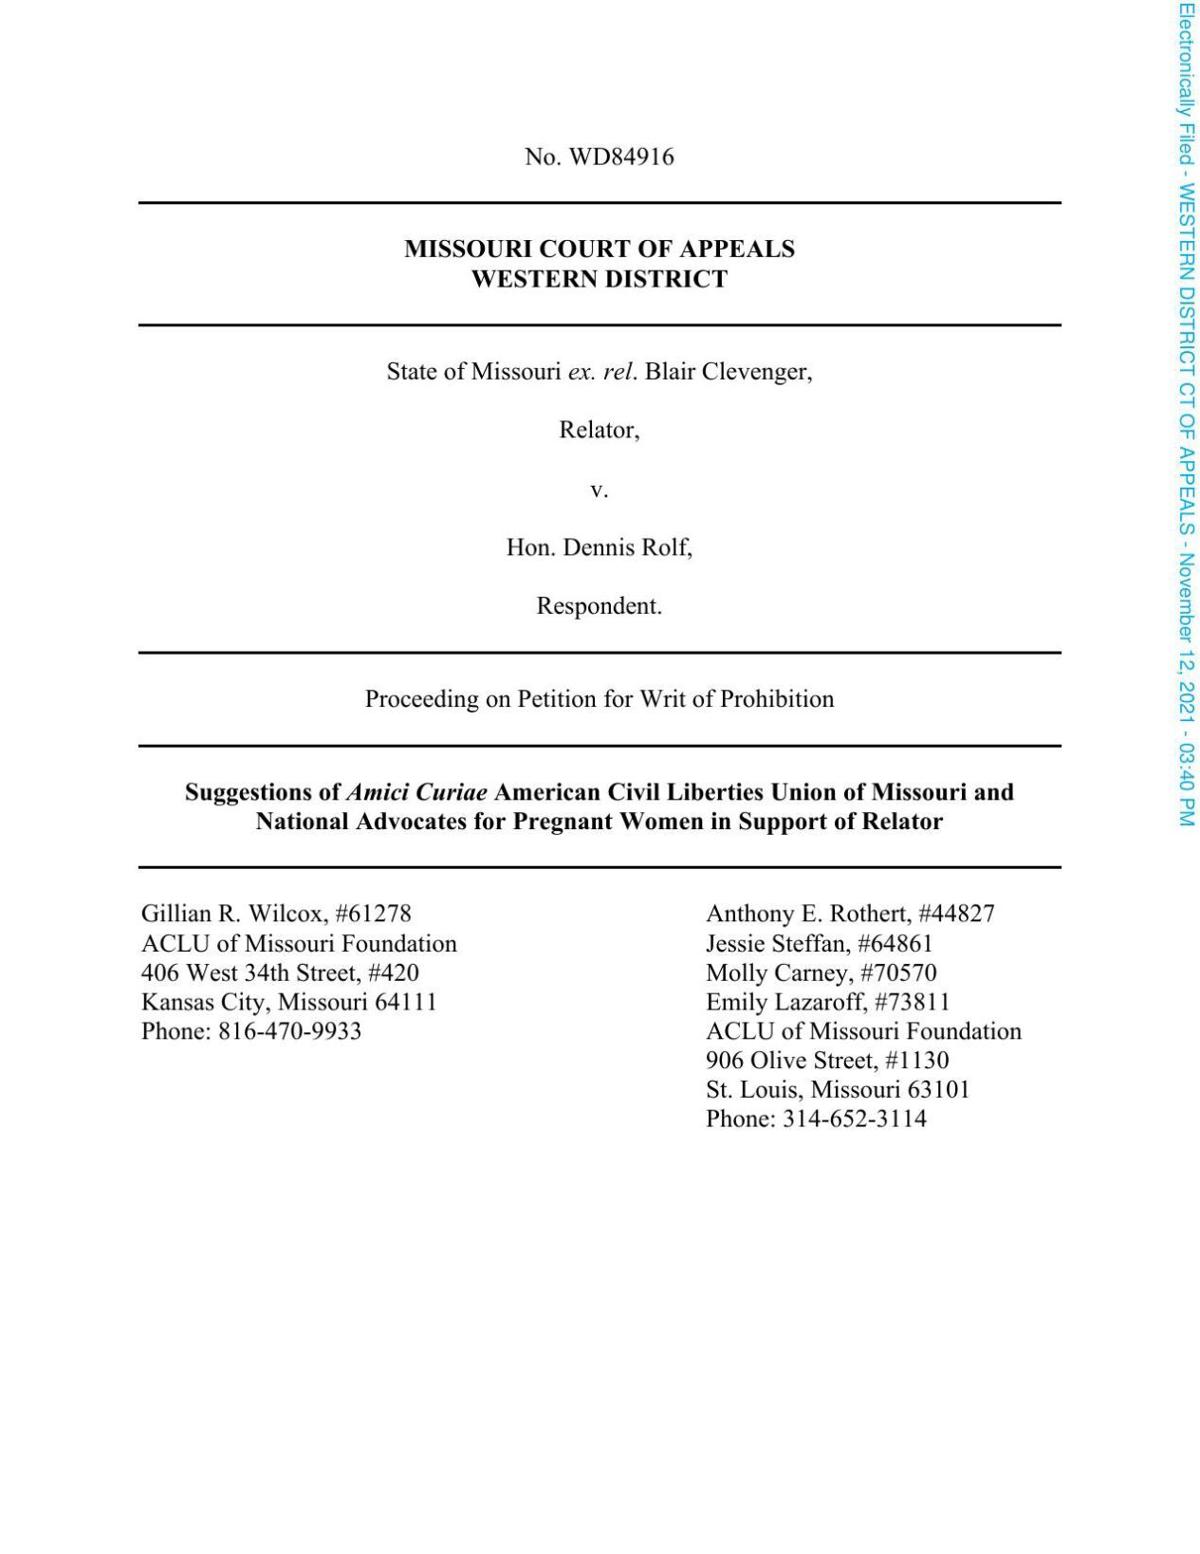 Clevenger amicus brief